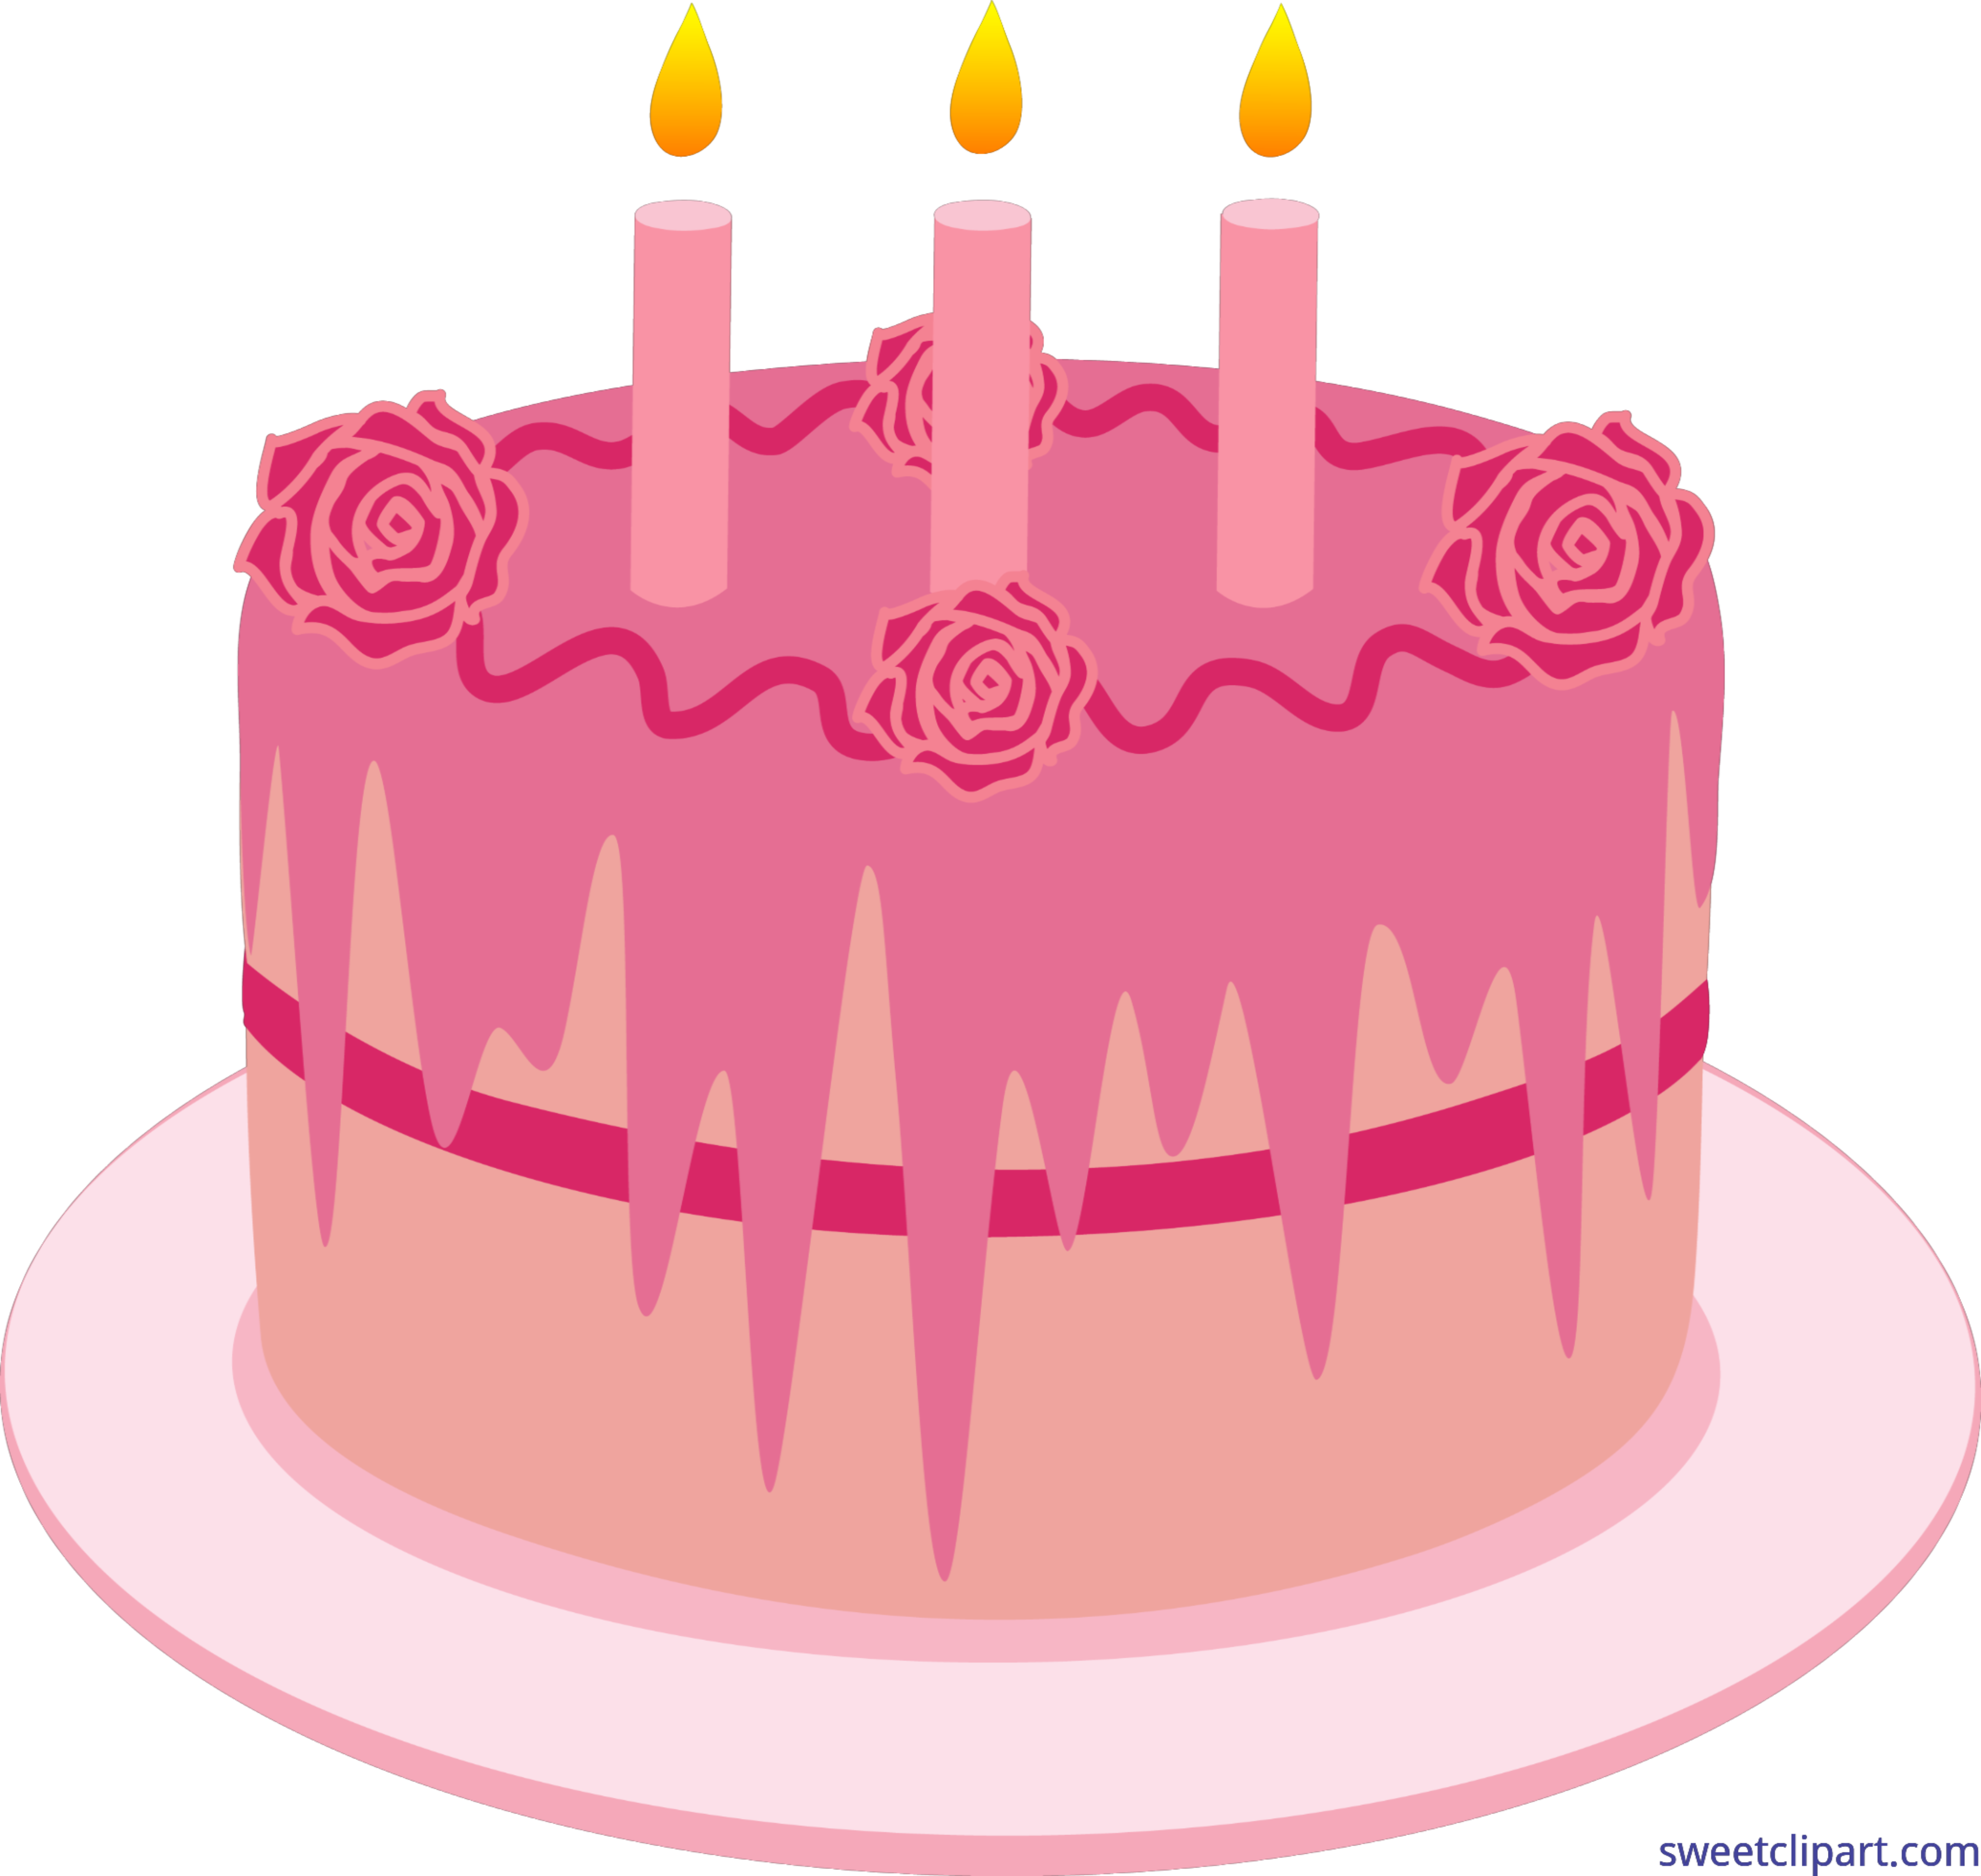 Birthday cake candles strawberry. Desserts clipart baked sweet